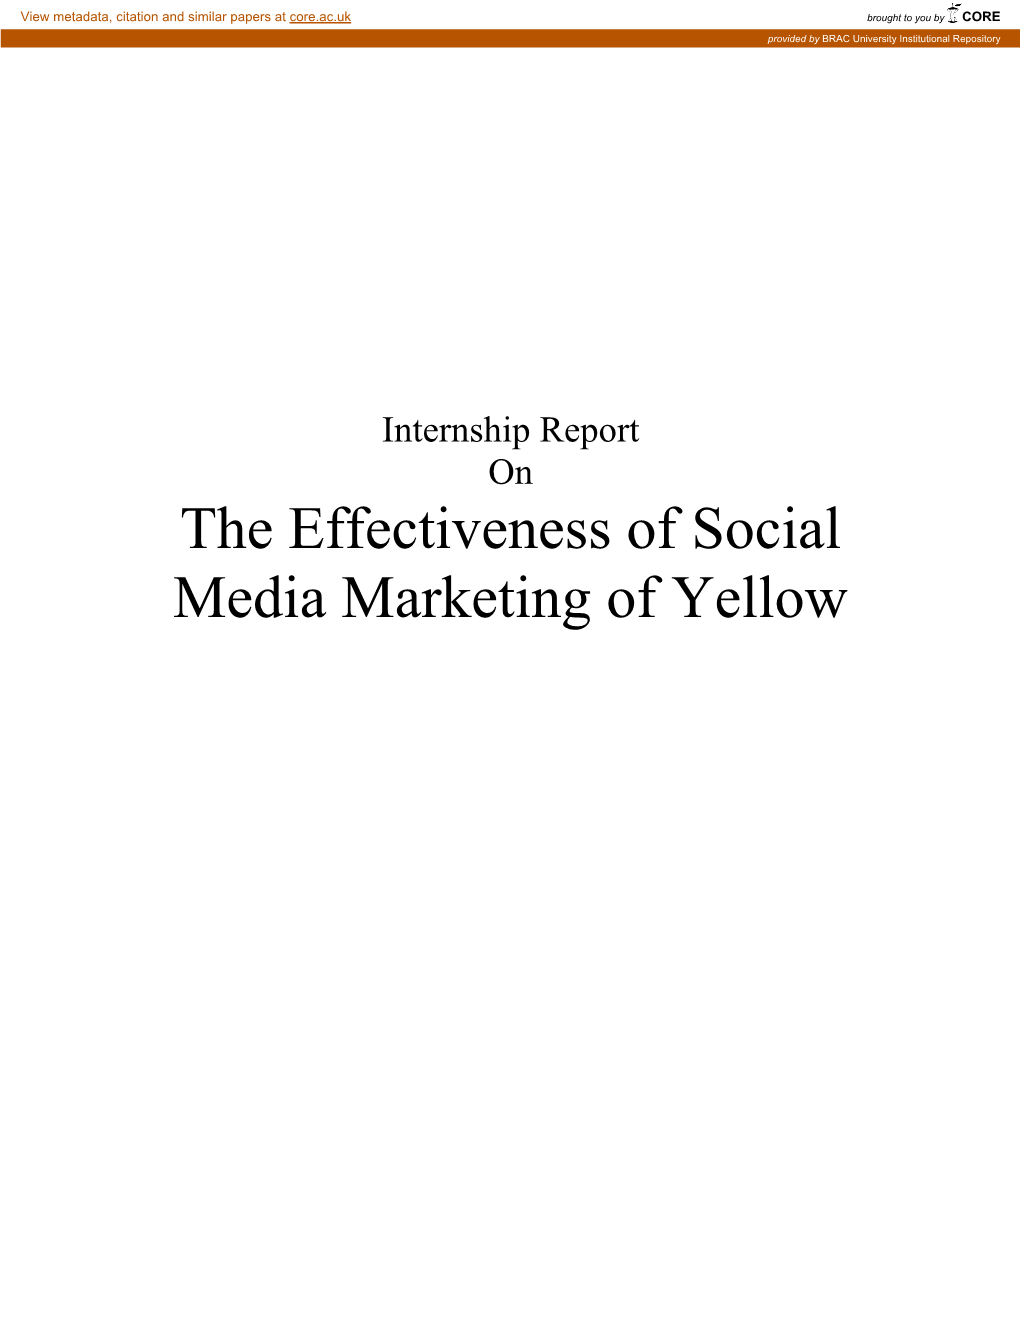 The Effectiveness of Social Media Marketing of Yellow